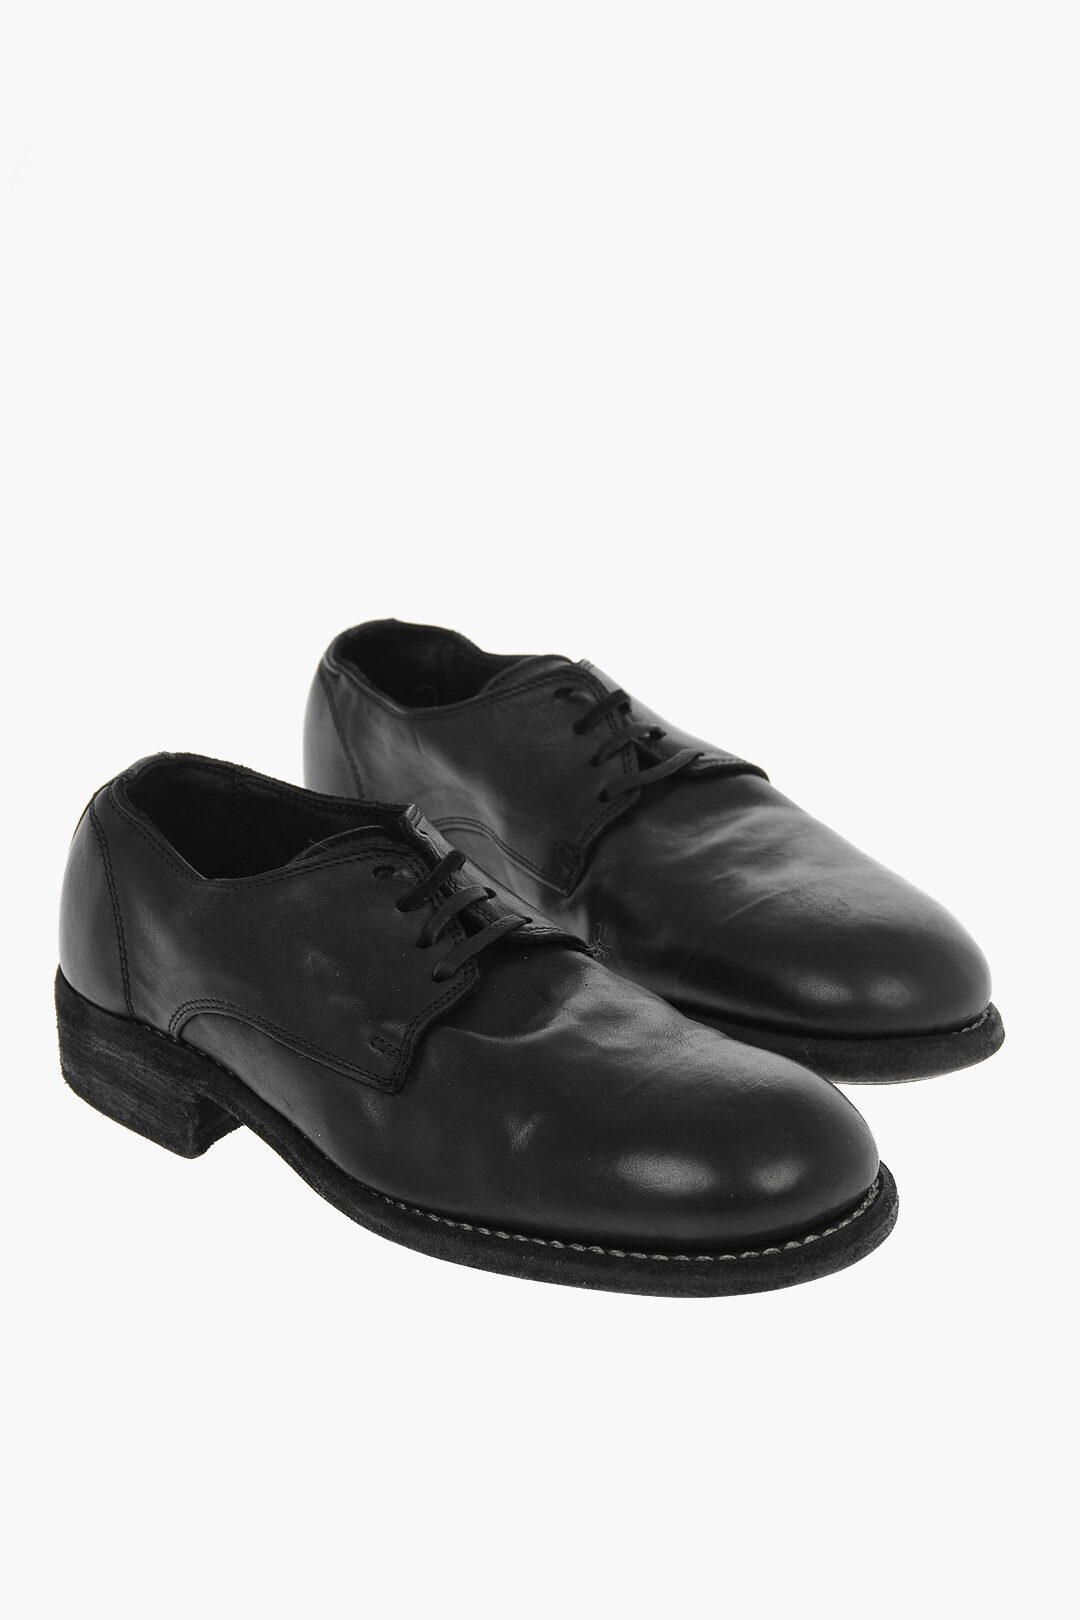 GUIDI グイディ Black ドレスシューズ 992SHFG BLKT レディース LACE-UP HORSE LEATHER DERBY SHOES 3CM  dk